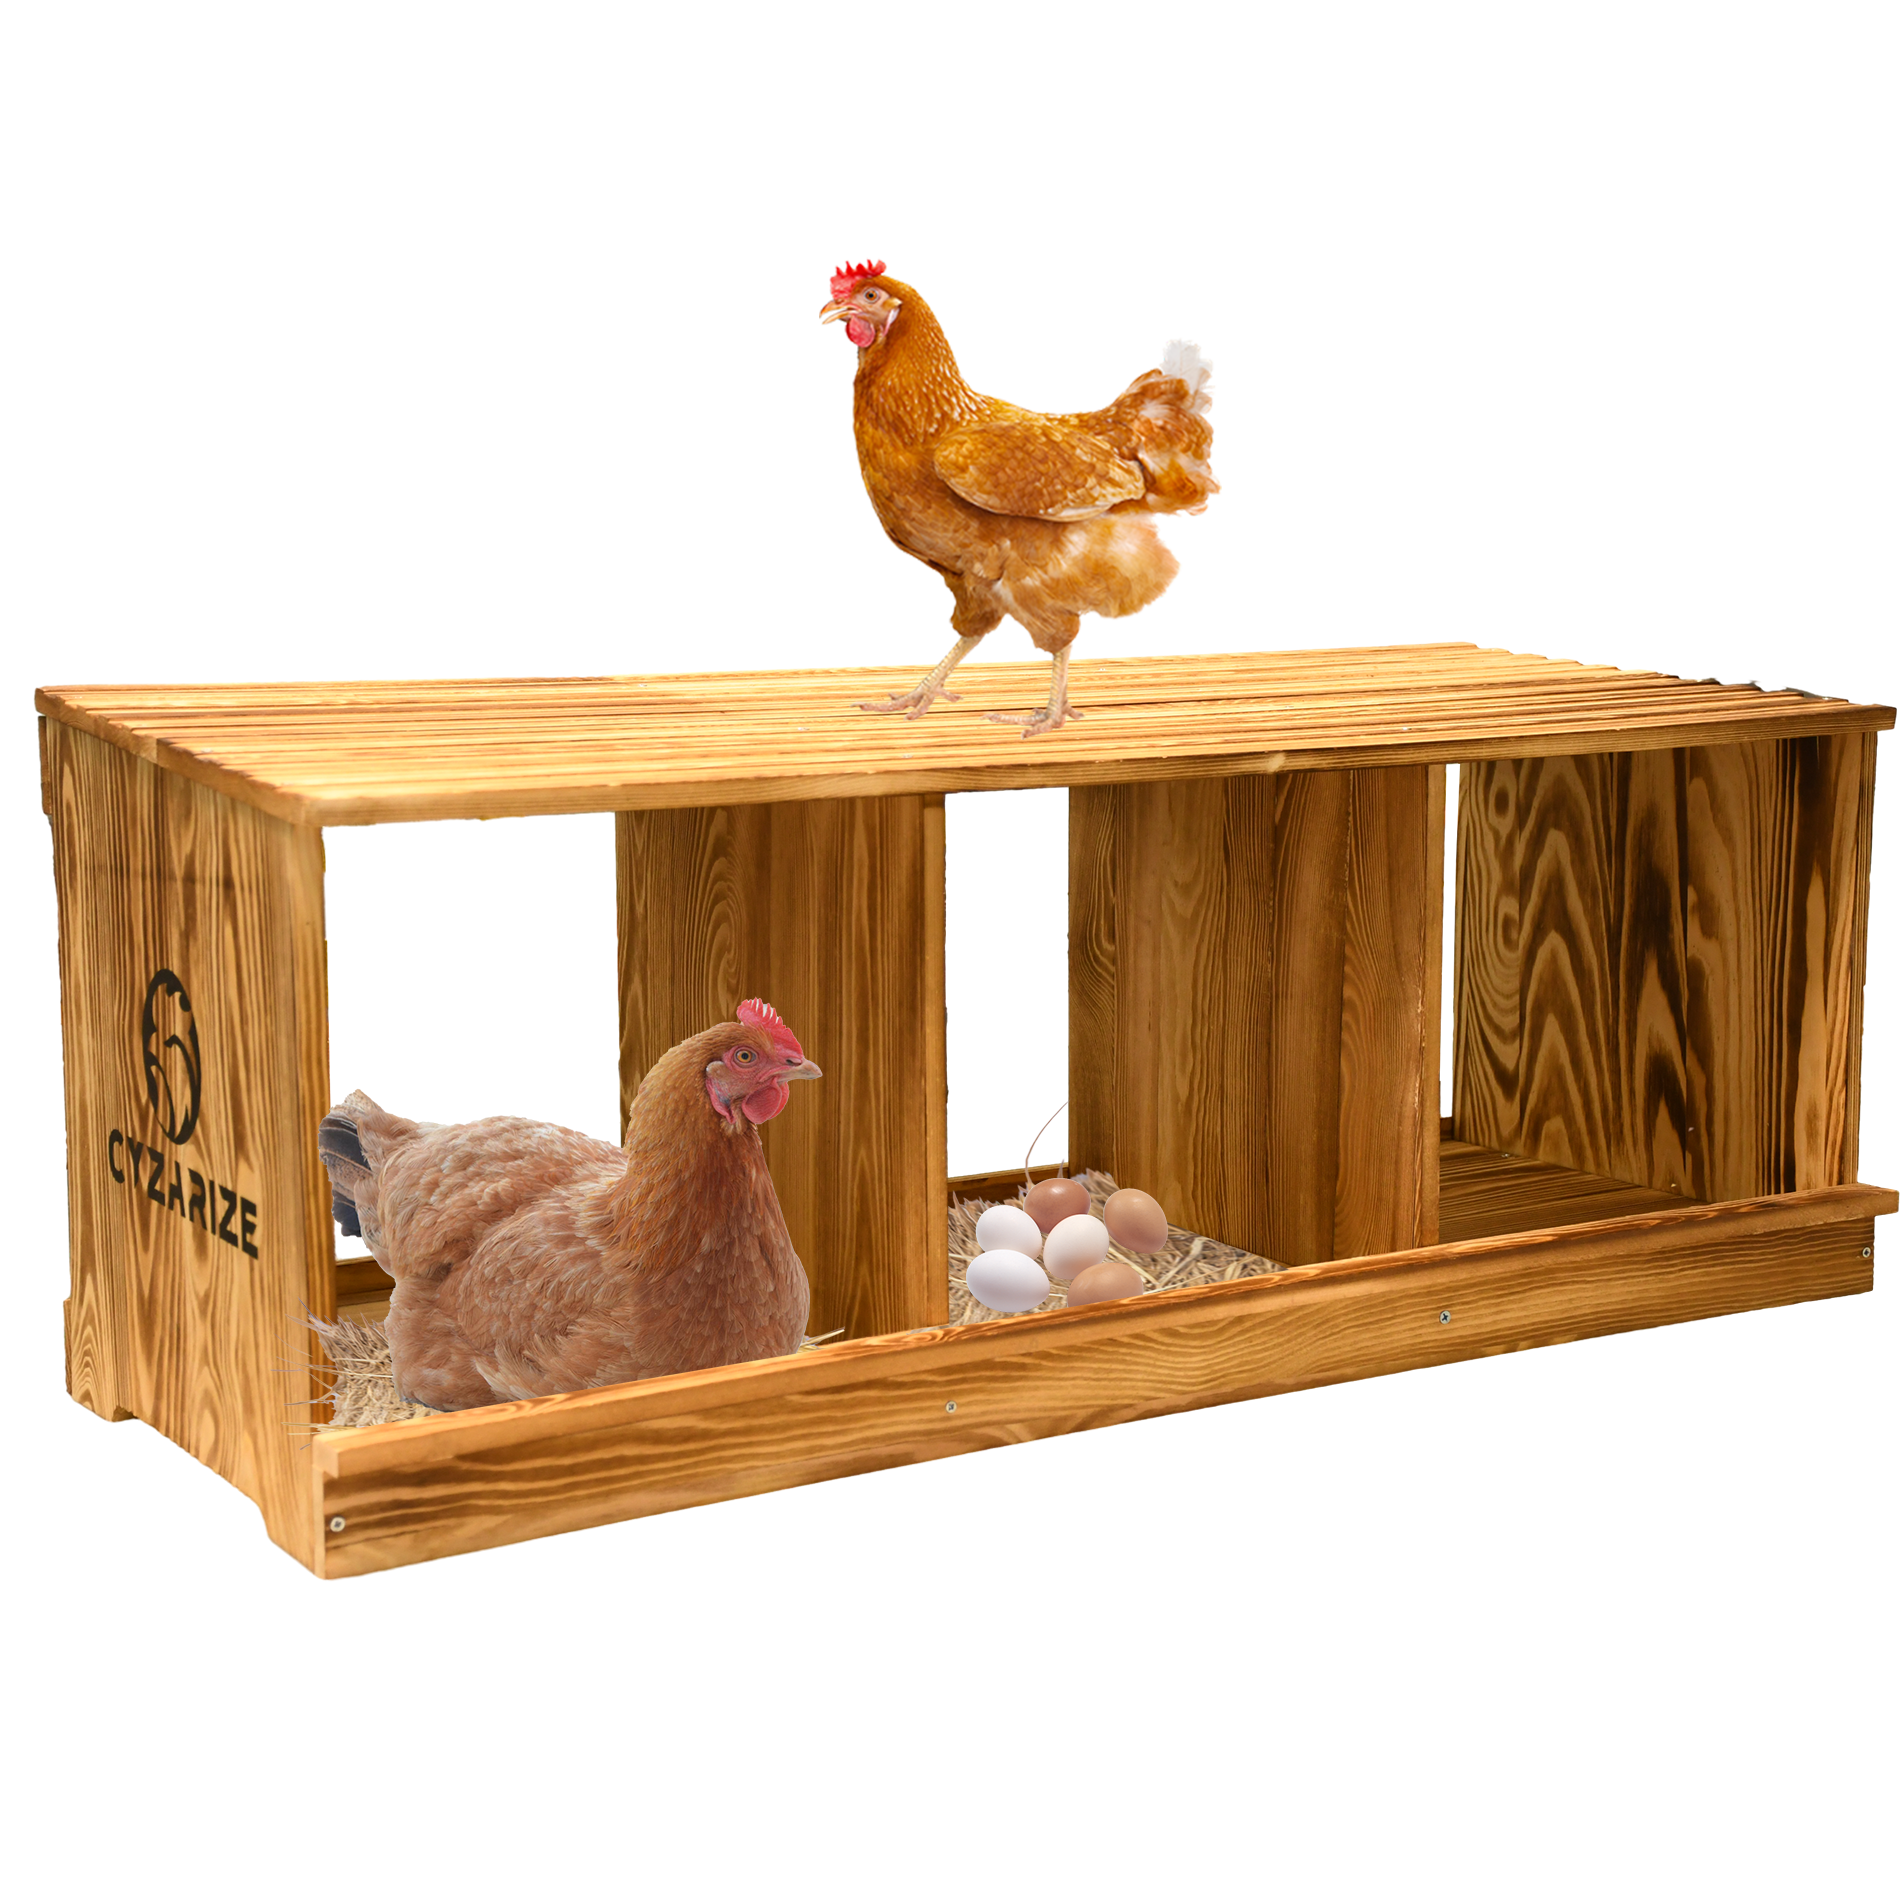 Hen egg laying box. solid wood wall mounted. protects eggs. weatherproof design. perfect for hens and ducks laying eggs